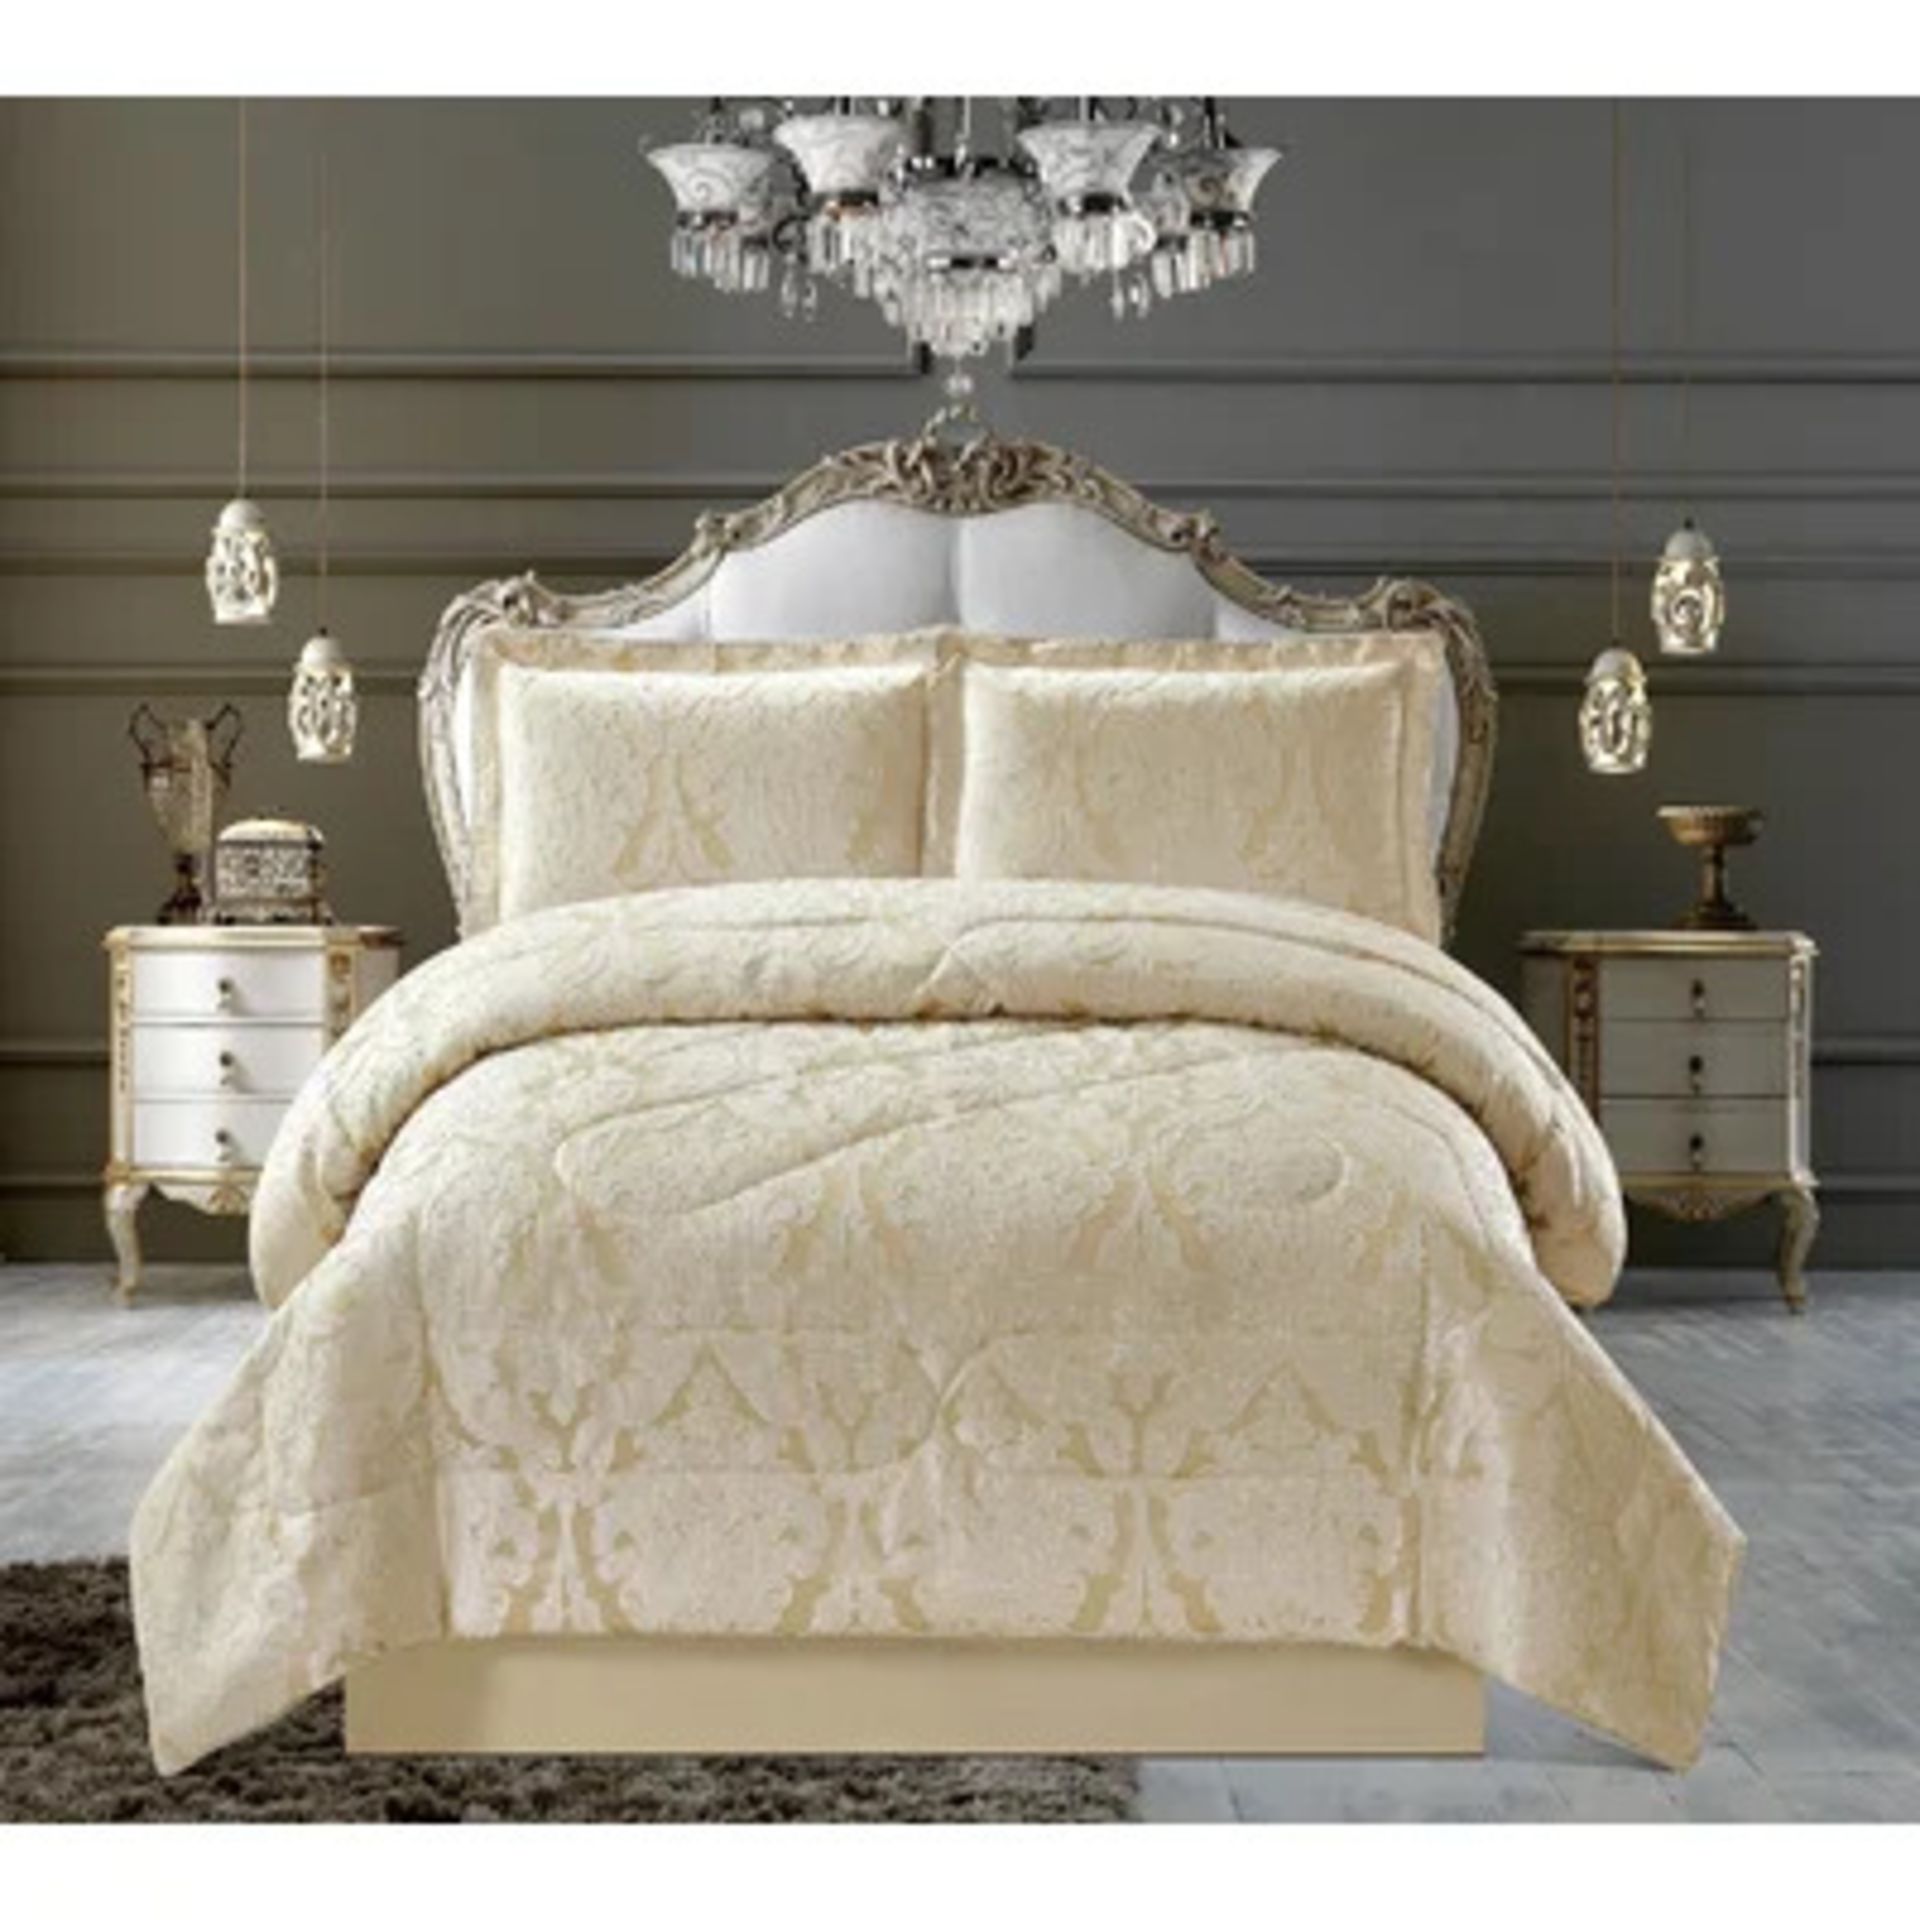 RRP £57.99 - Blosser Bedspread Set with Pillowcases Colour: Beige, Size: 240 x 260 cm Bedspread - - Image 5 of 6